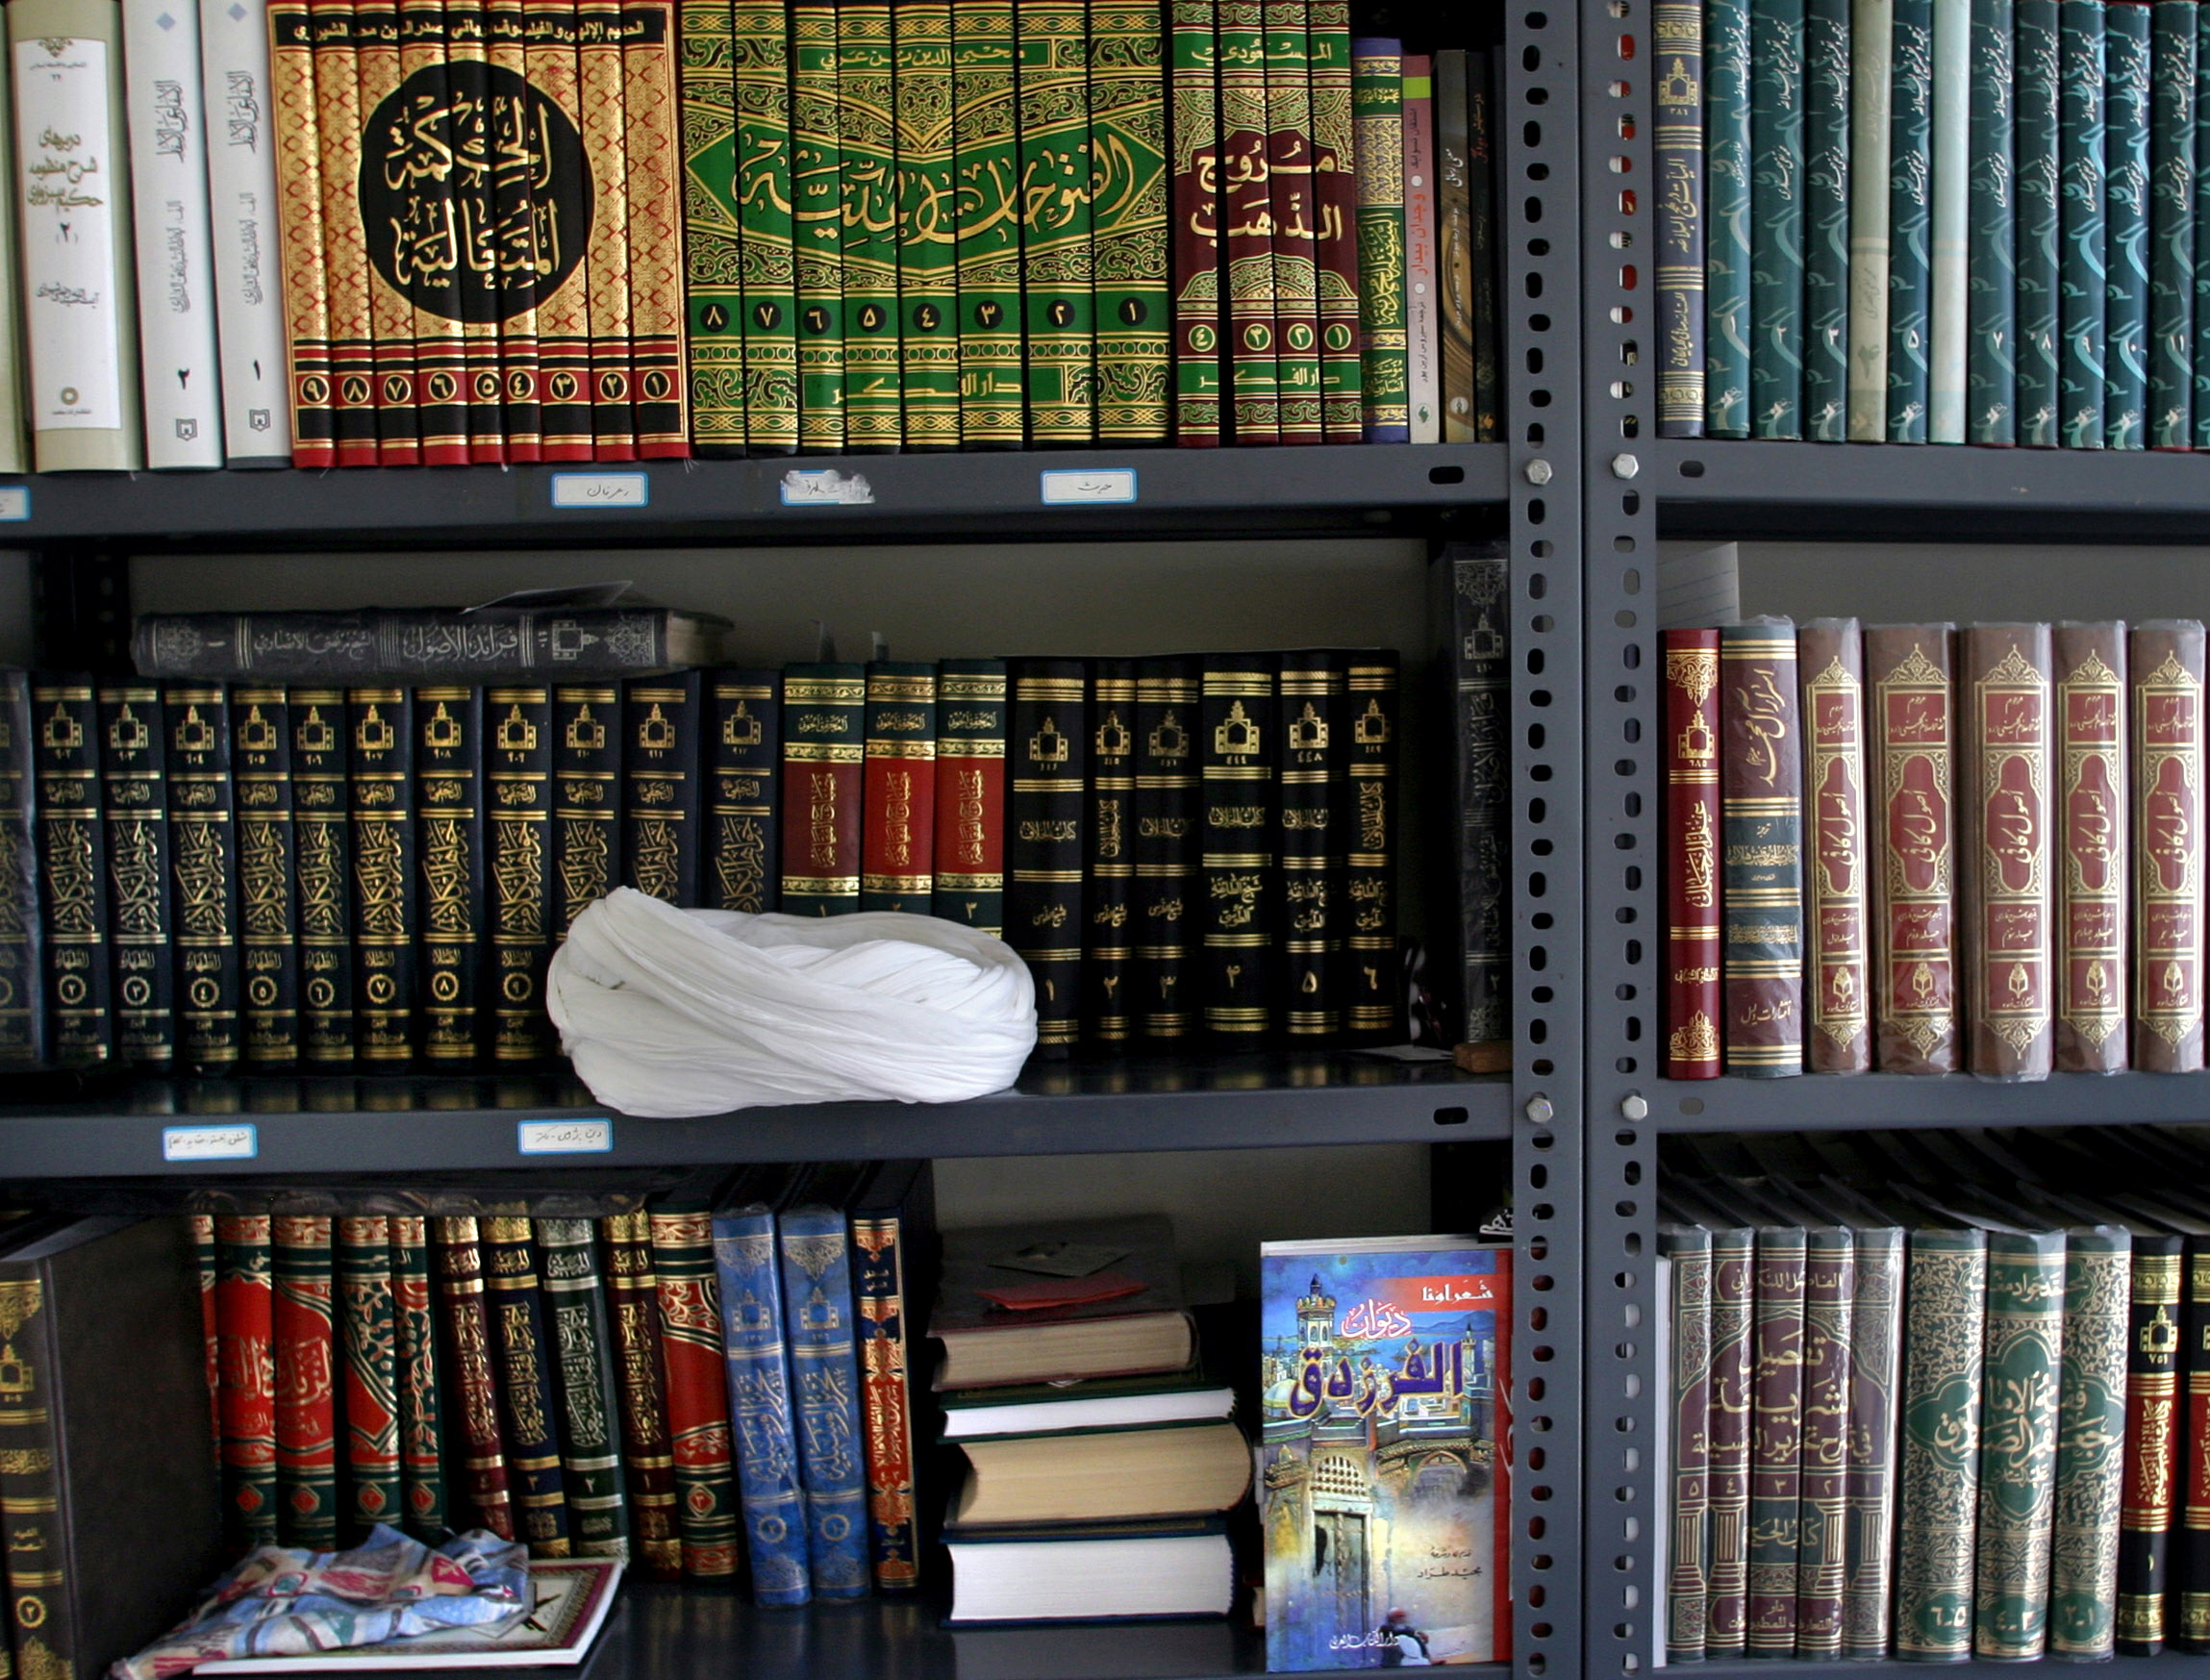 Why is the Iranian government opening the world's biggest bookstore?